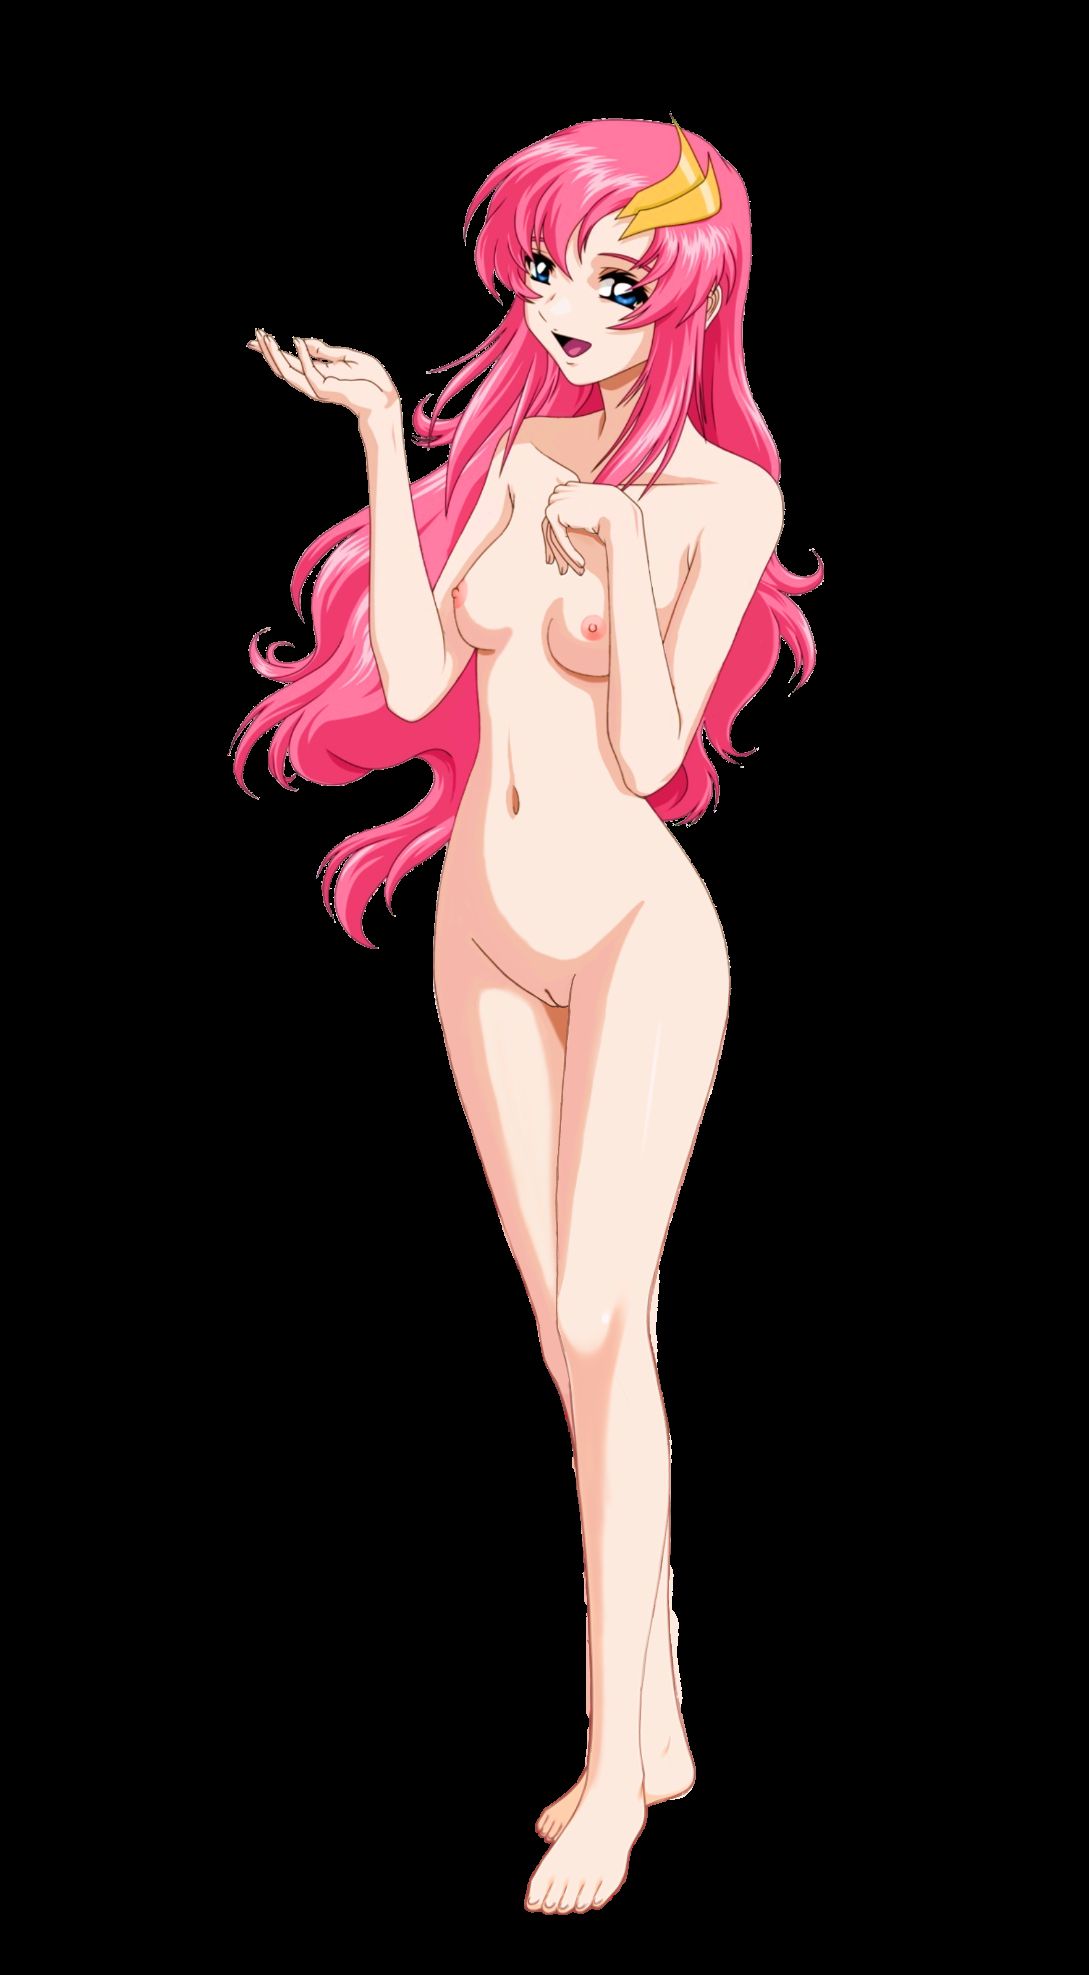 [Erotica character material] PNG background transmission erotic image such as anime character Part 315 41